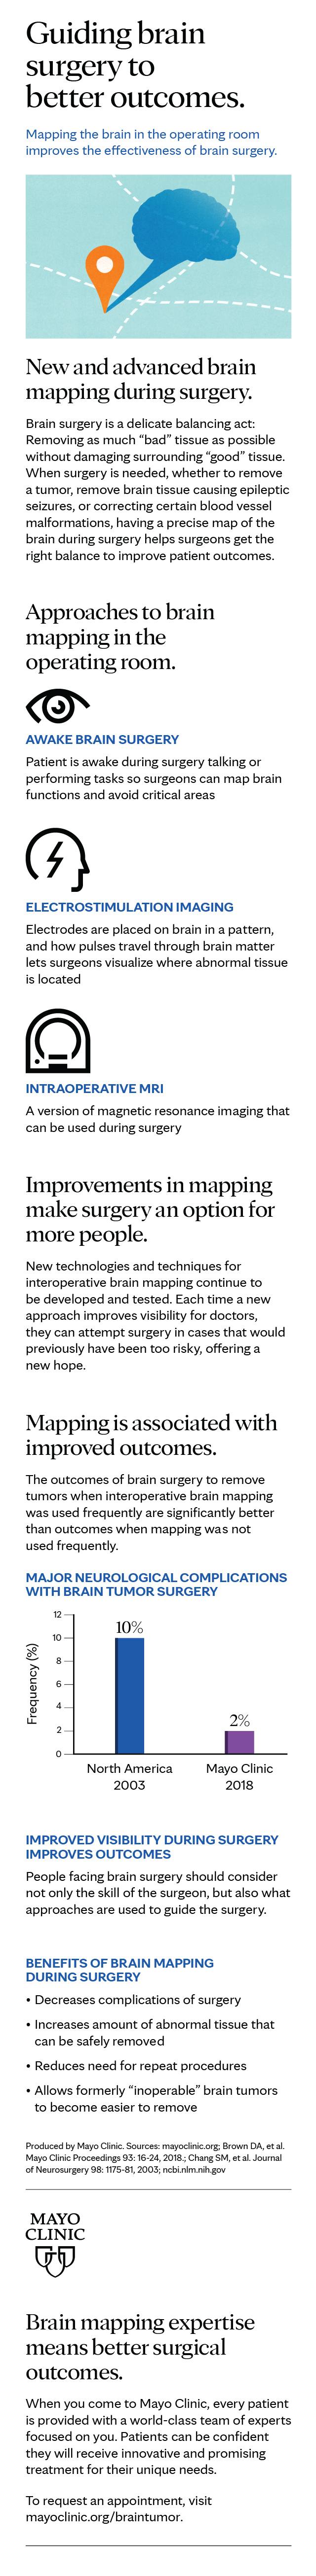 Infographic about brain surgery and brain mapping